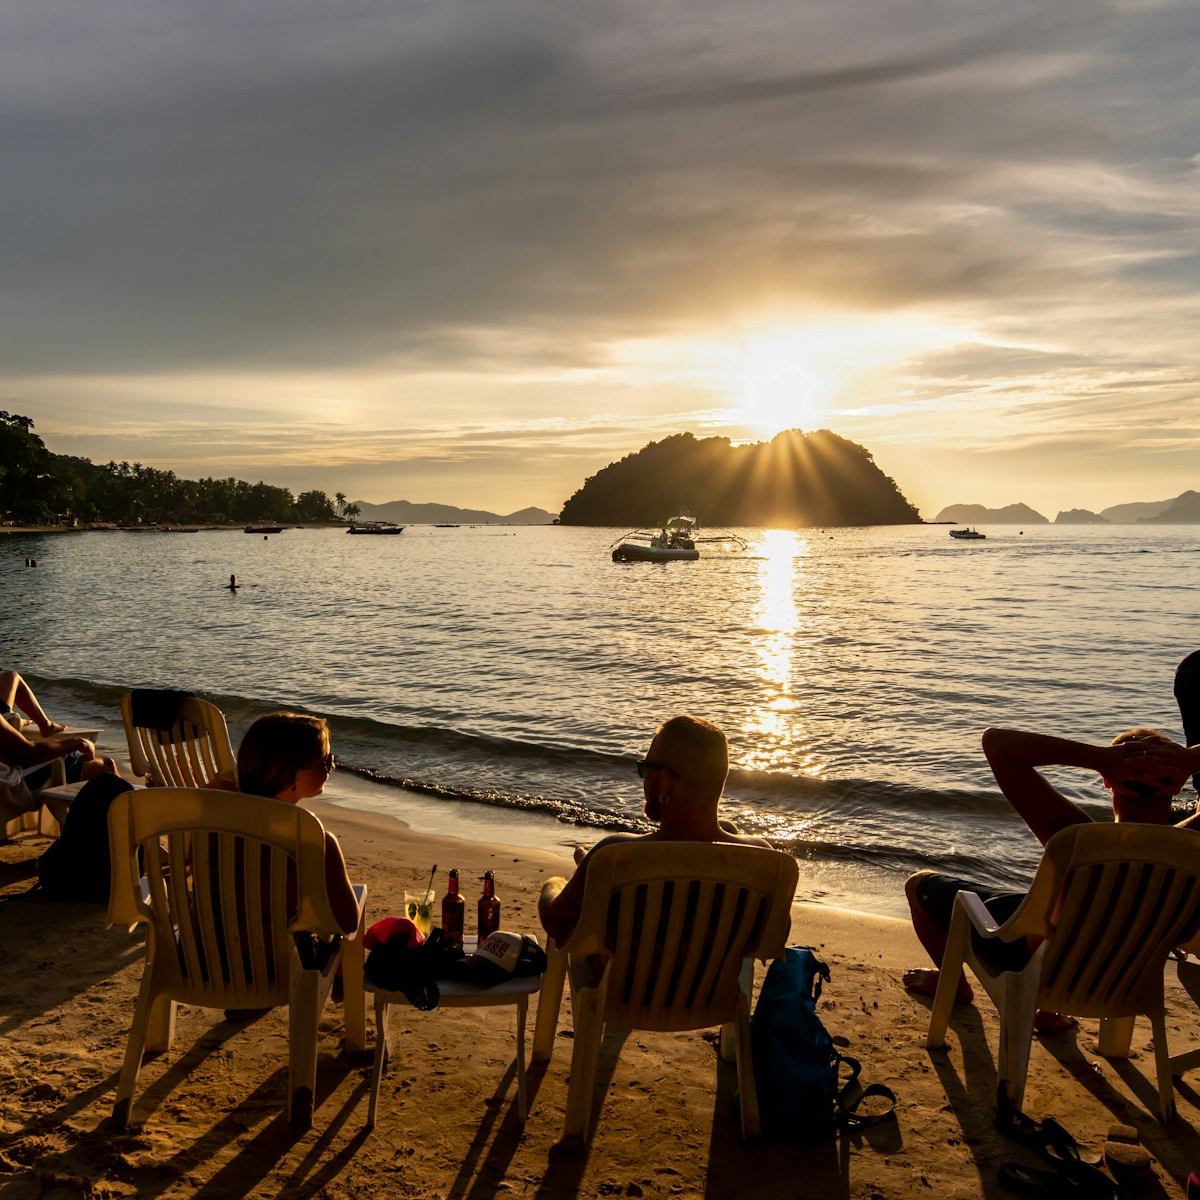 People watching the sunset on the Maremegmeg beach at El Nido, Palawan, Philippines.